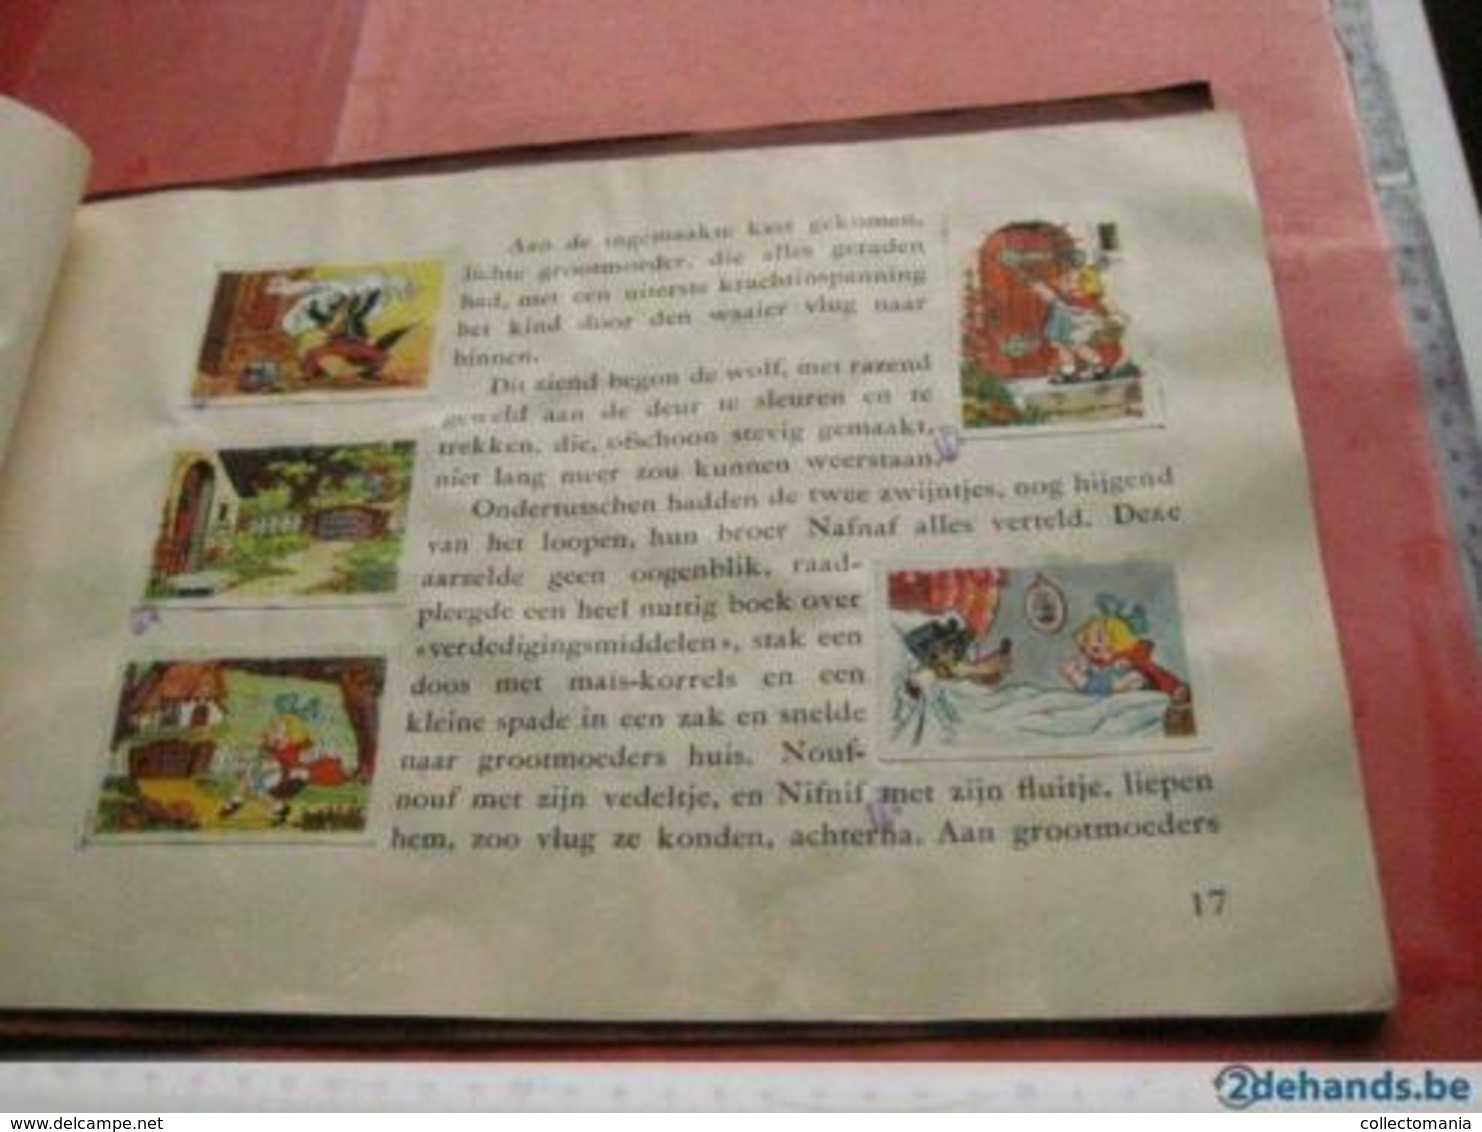 Disney album, with full set fairy tale animation movie 1938,  3 pigs, big woolf, little red riding hood roodkapje